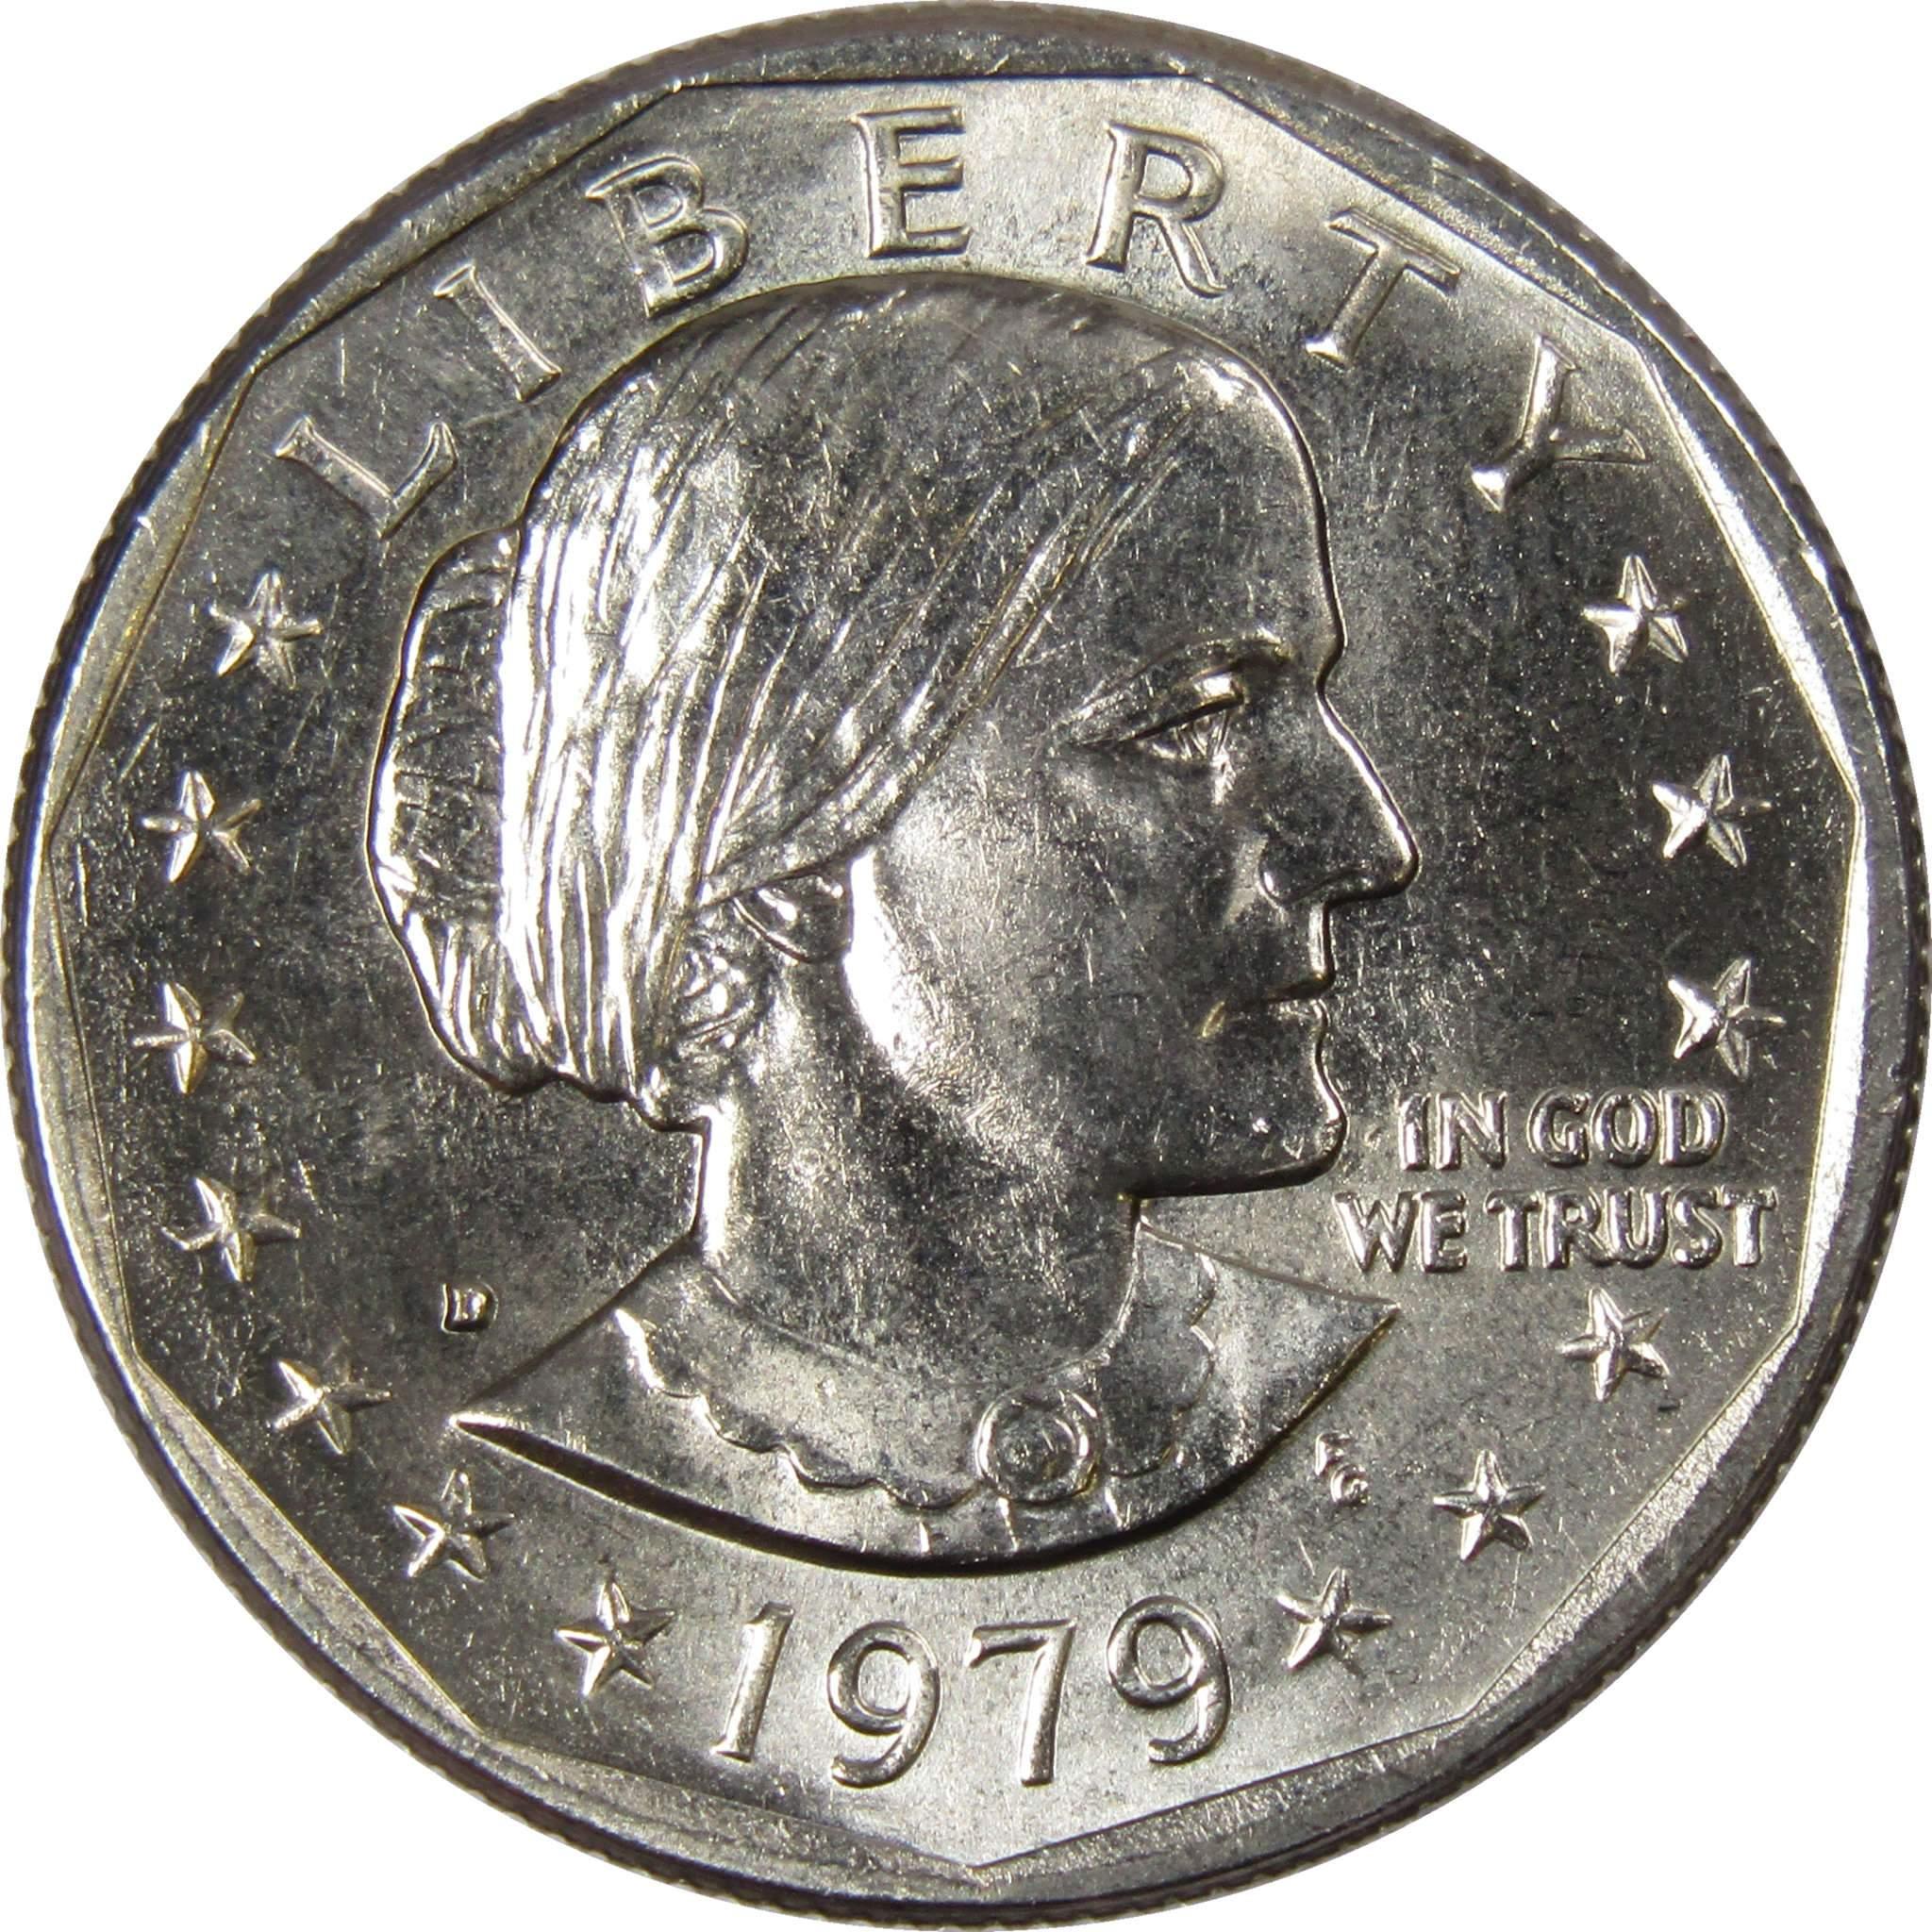 1979 D Susan B Anthony Dollar BU Uncirculated Mint State SBA $1 US Coin